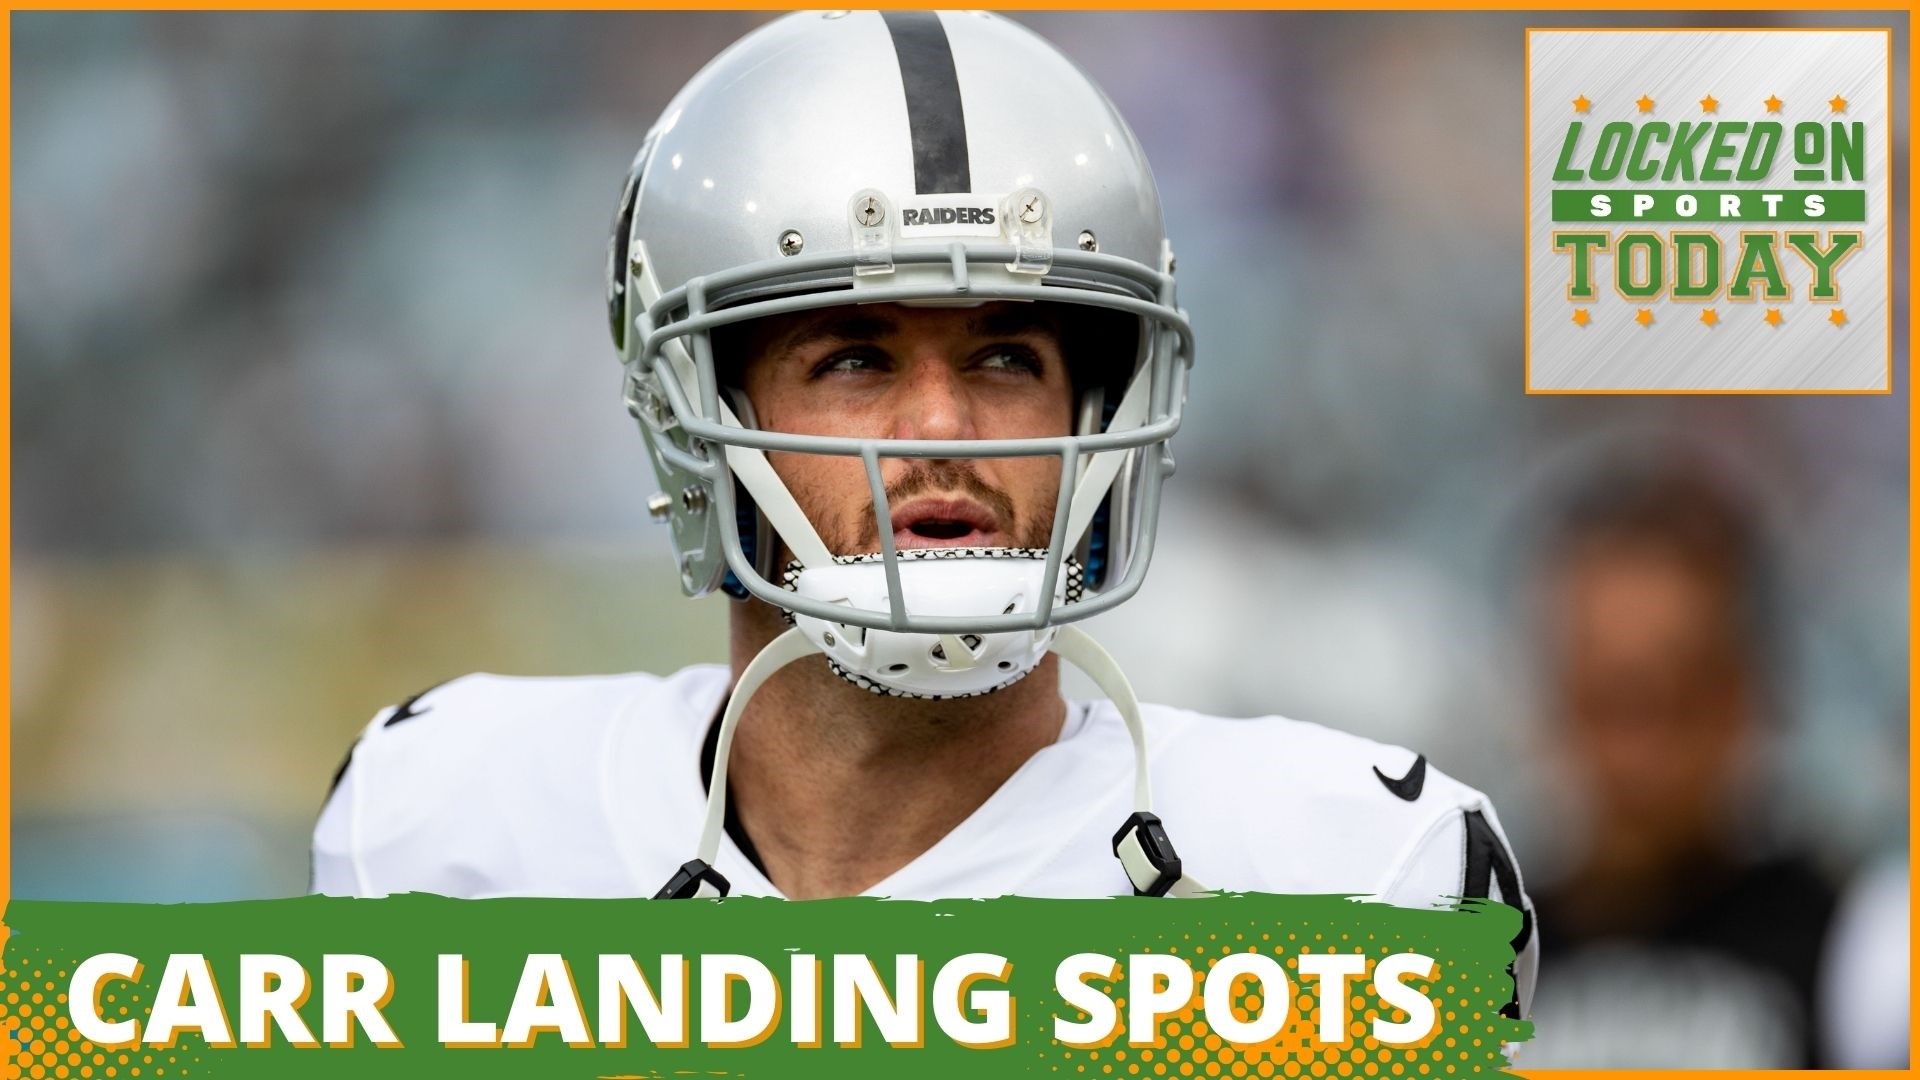 Discussing the day's top sports stories from why Carr would be a good fit for the Saints to potential NBA playoff matchups.